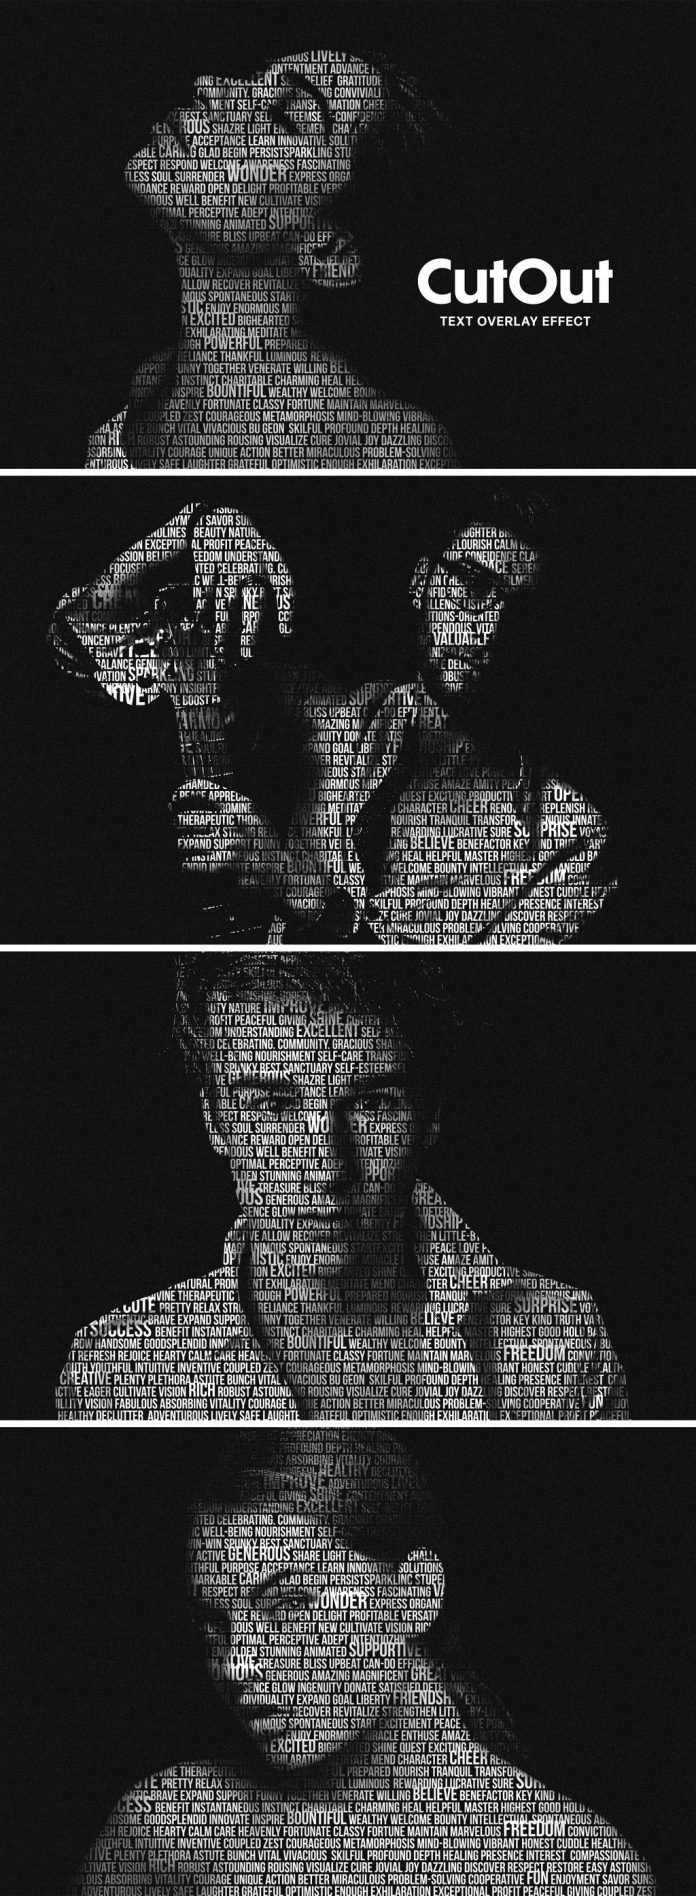 Cut Out Text Portrait Photo Effect Mockup for Adobe Photoshop